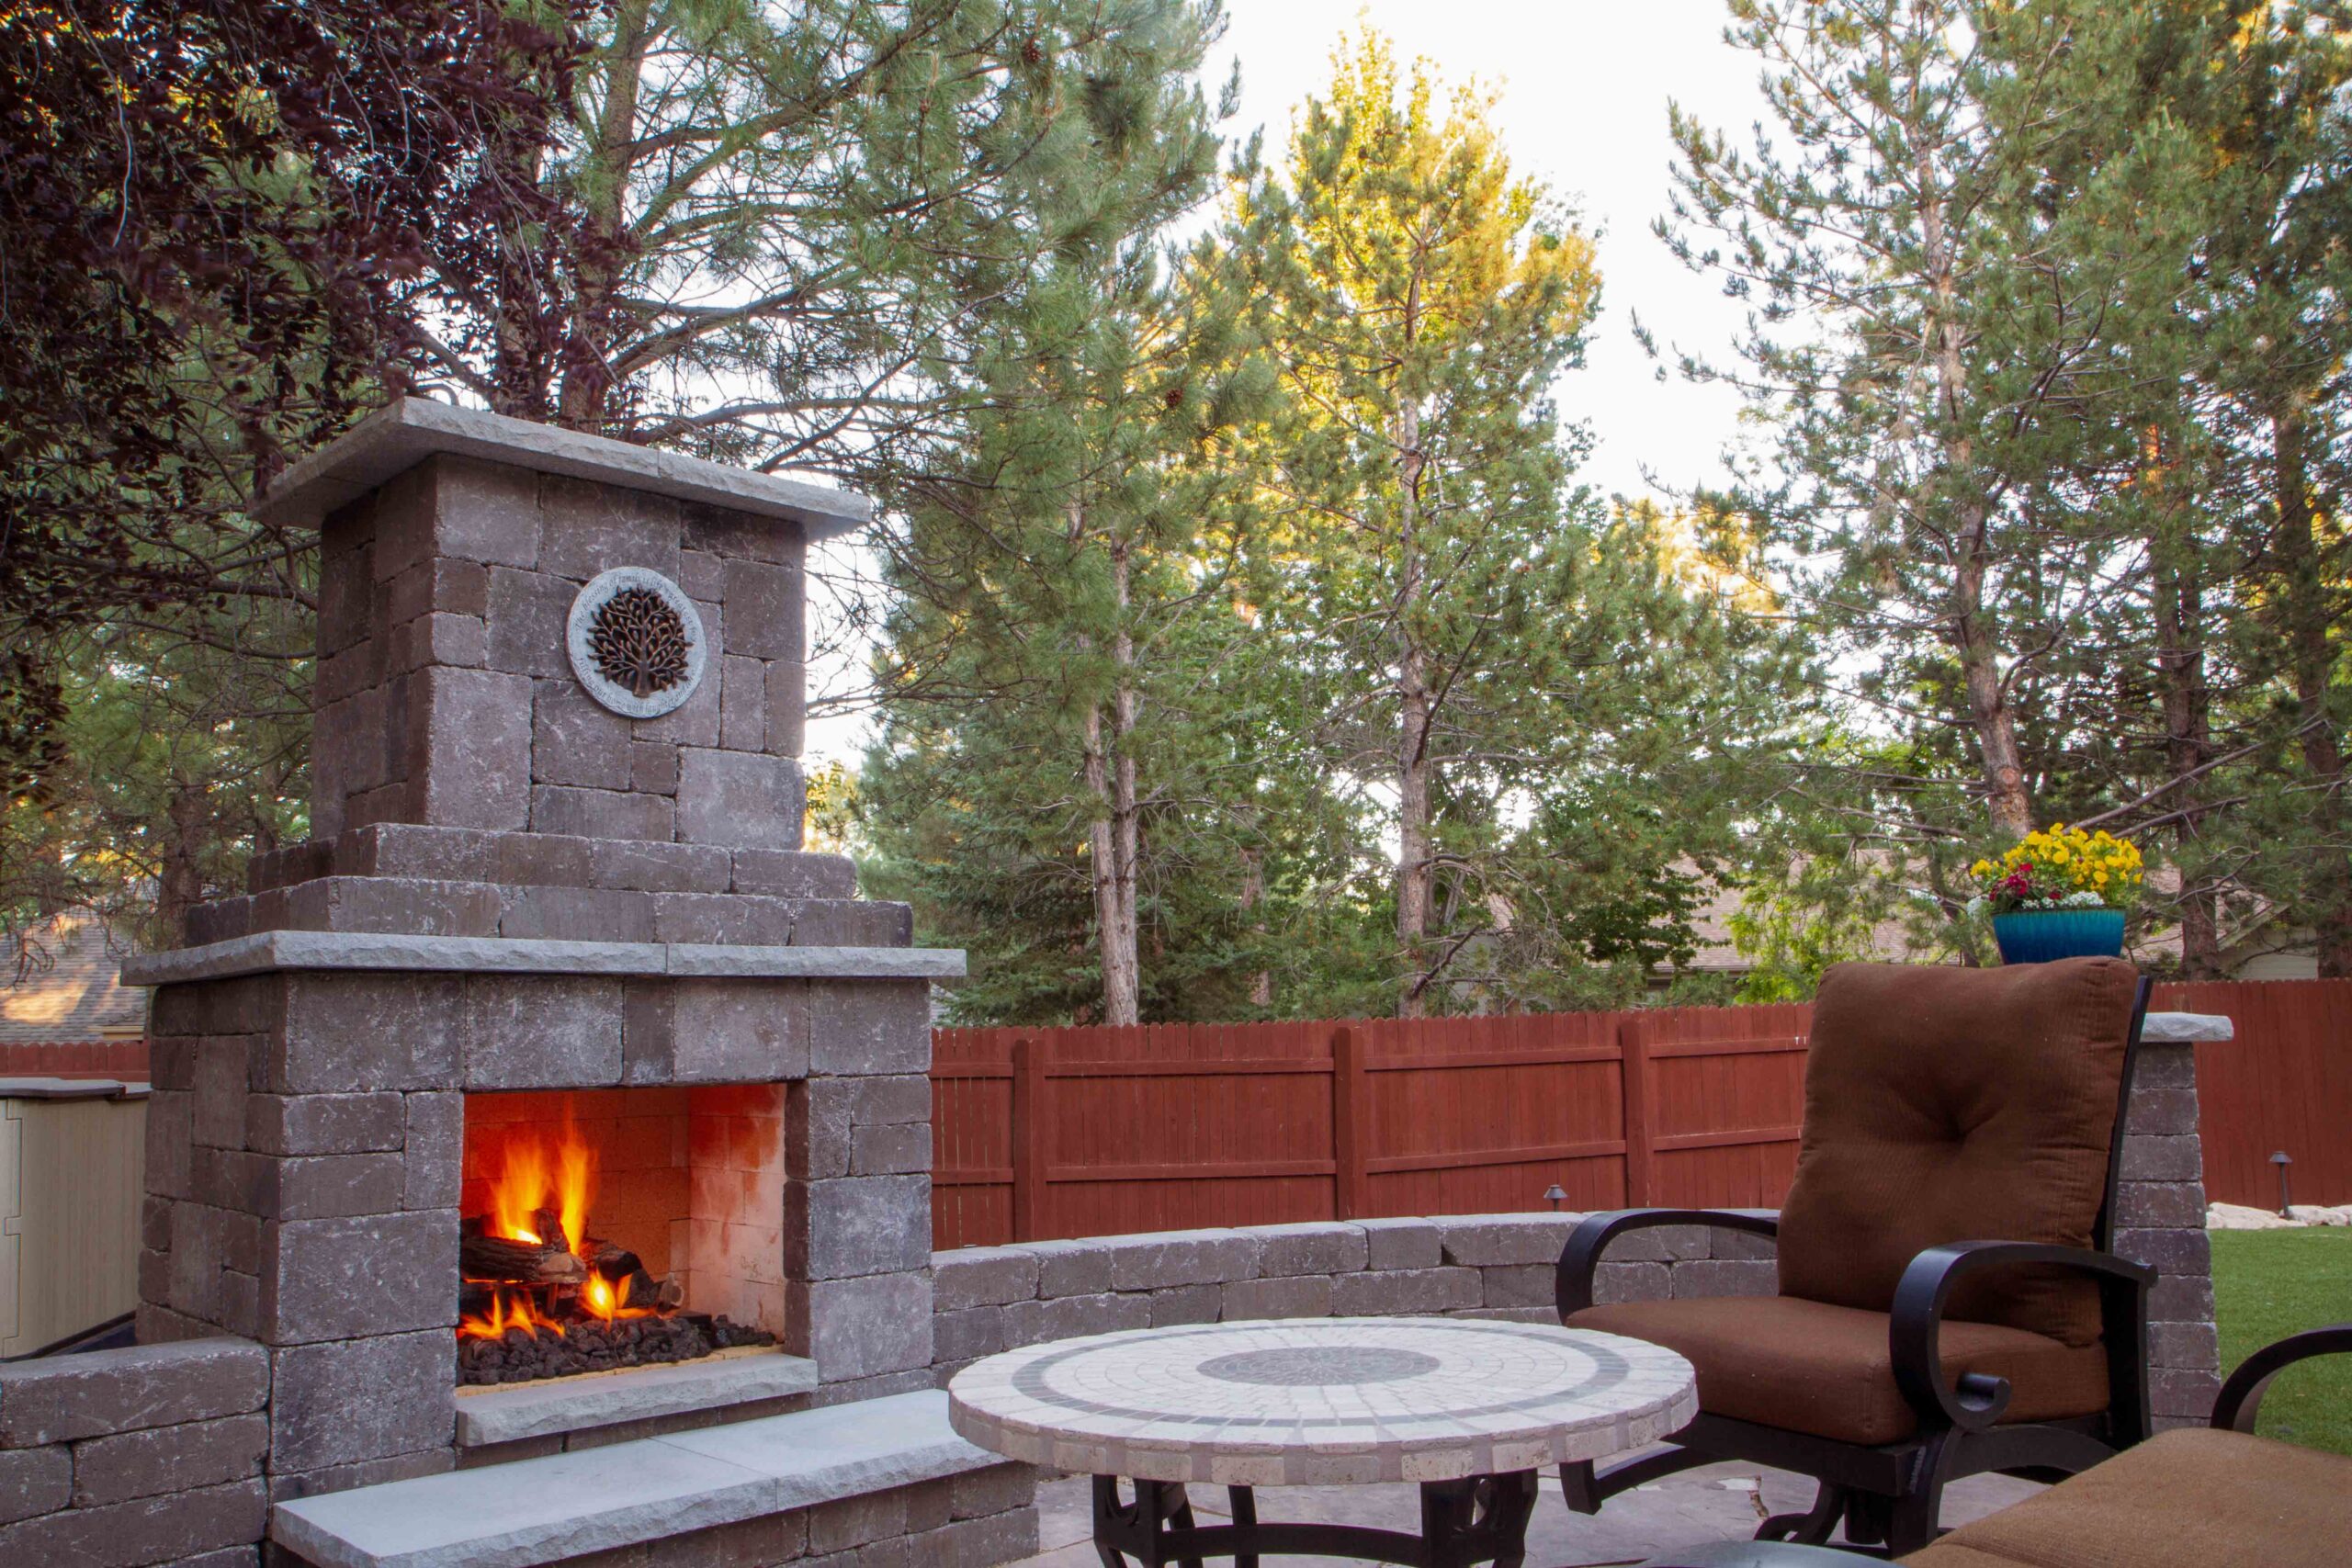 Outdoor patio with a lit fireplace and sitting area surround by pine trees